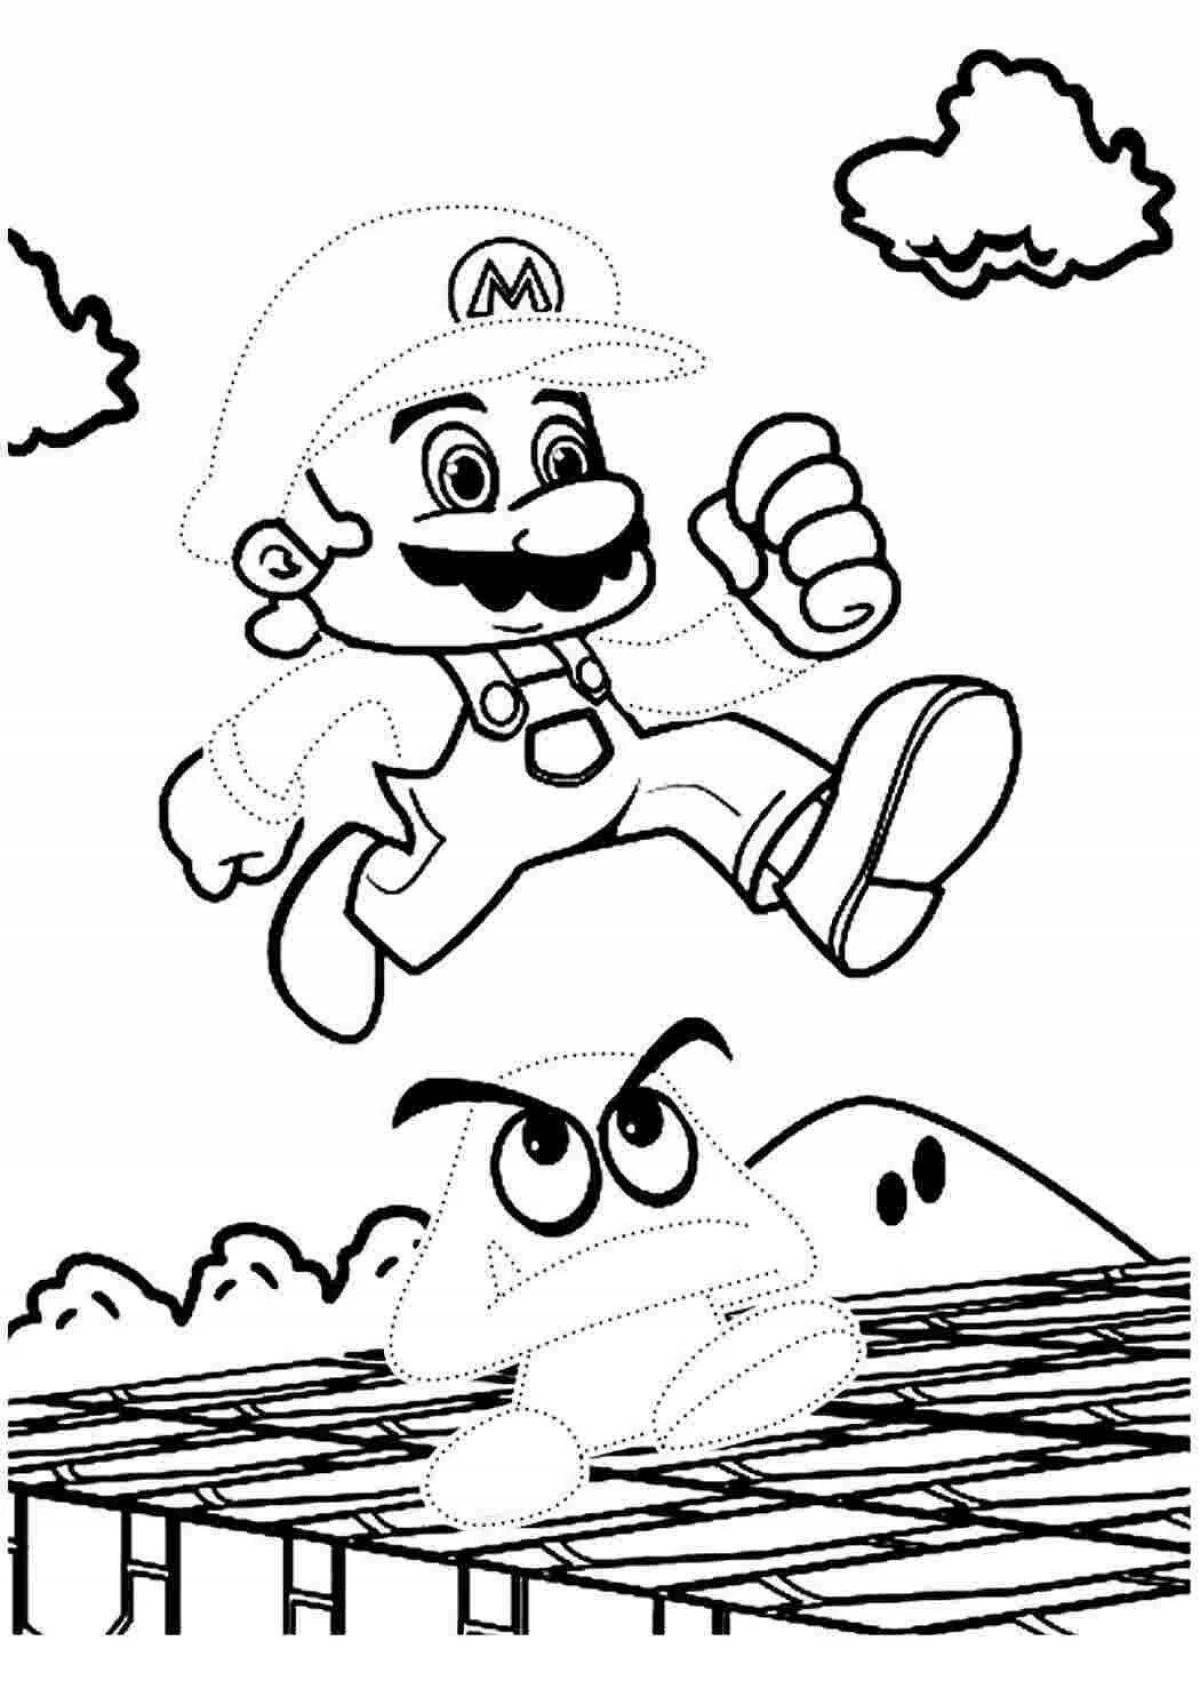 Mario by numbers #8